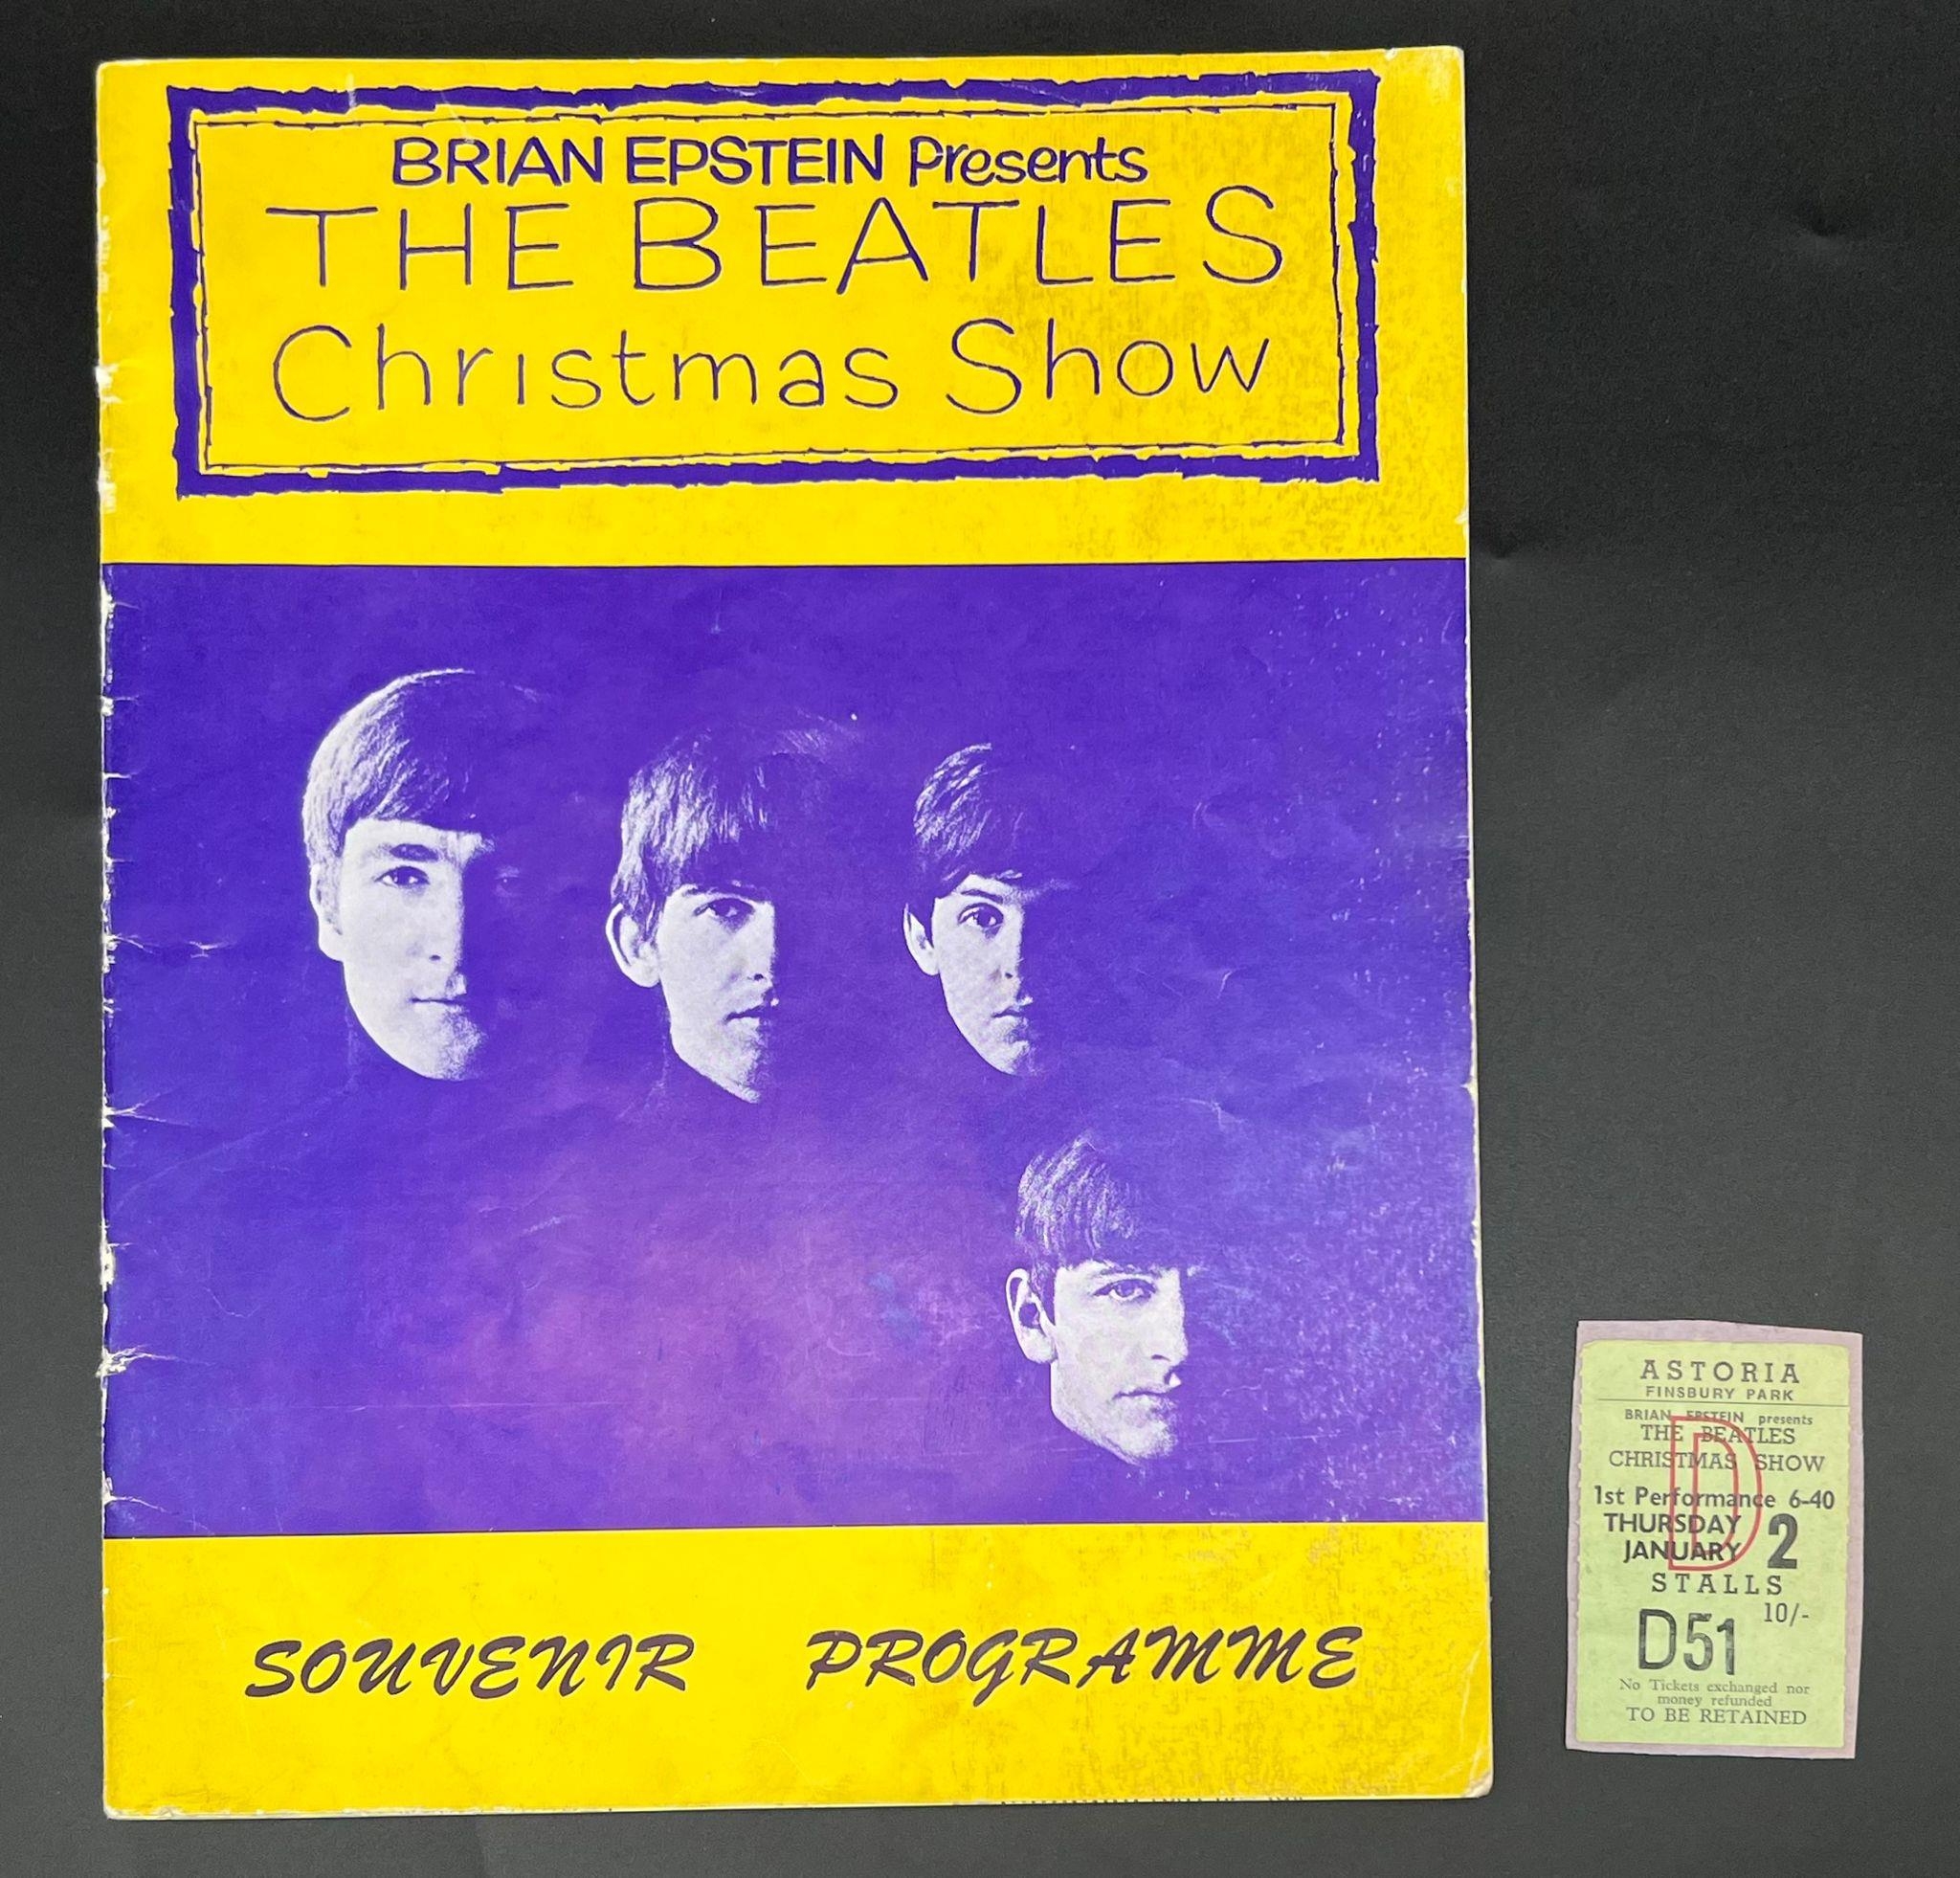 The BEATLES Christmas show programme and ticket from Thursday, January 2nd at the Astoria,